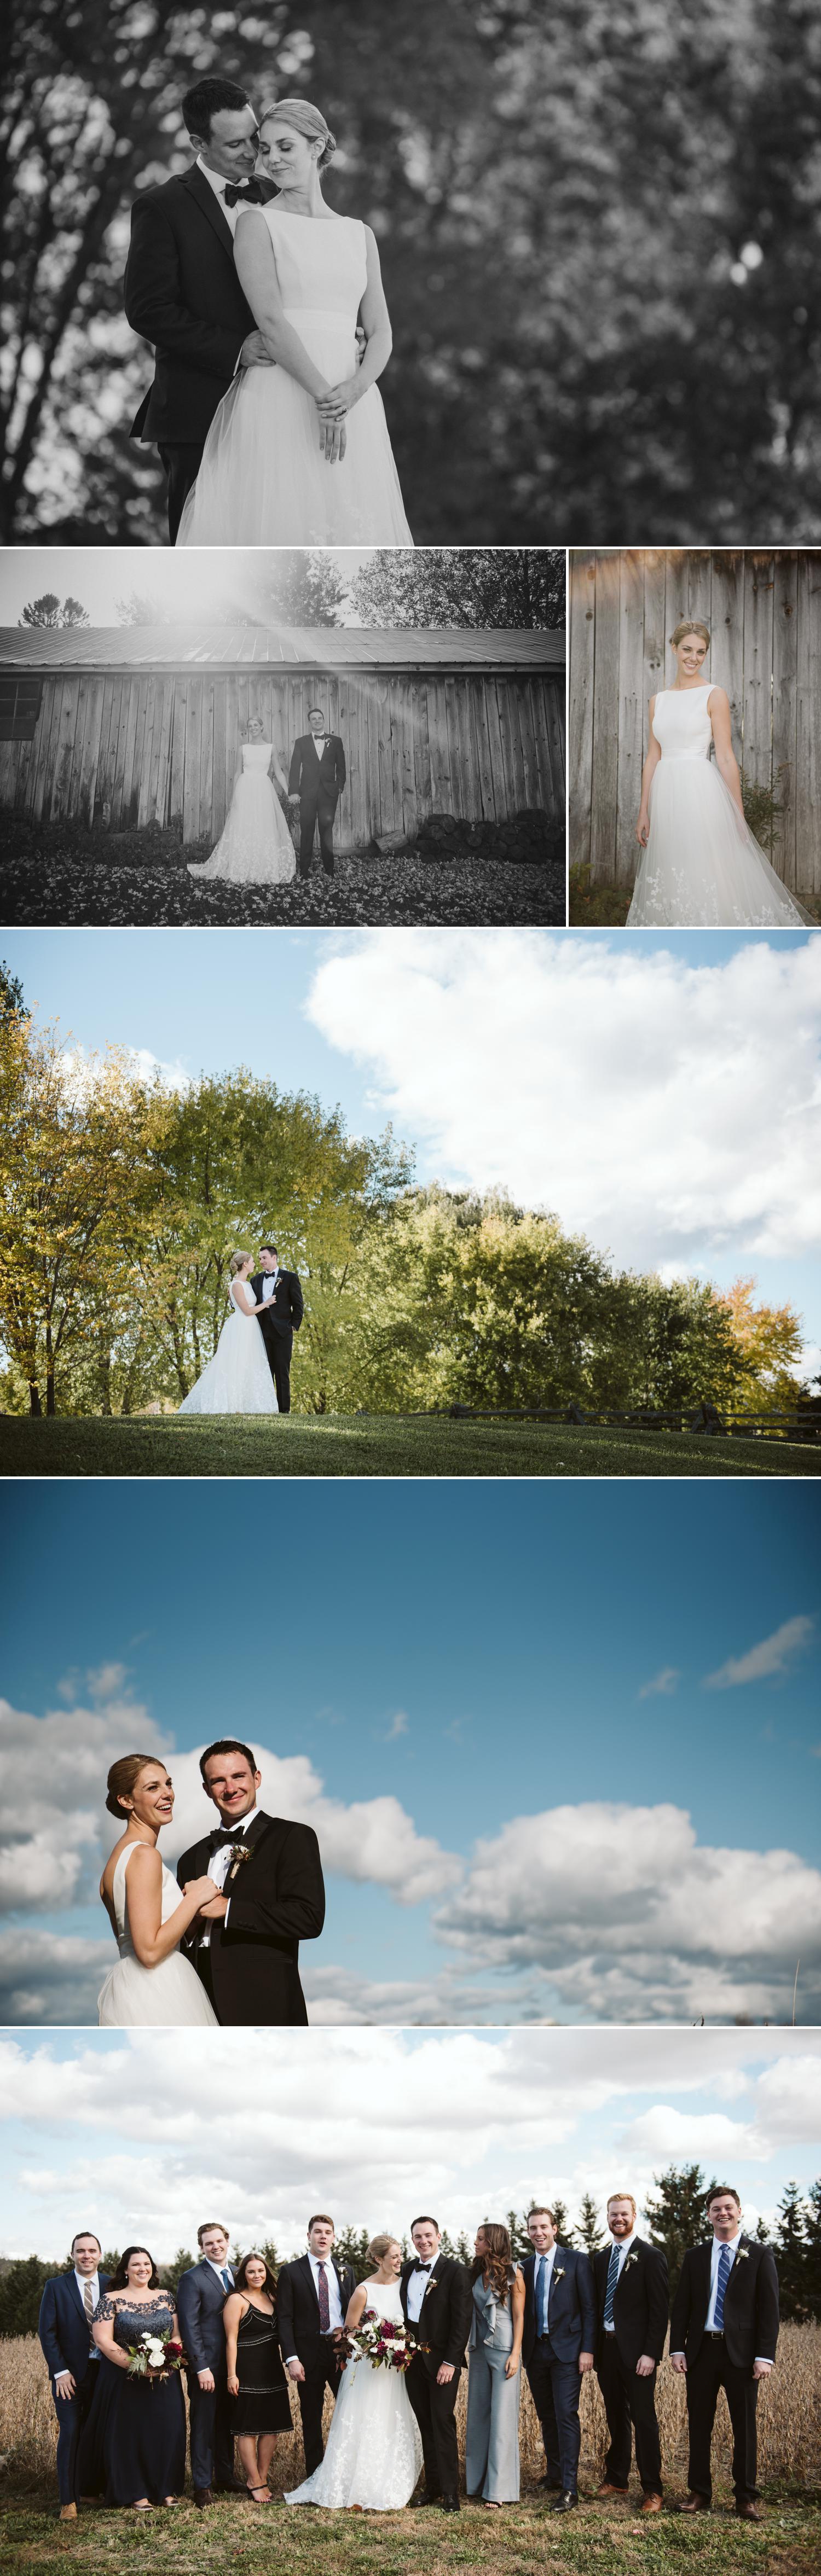 photos of a bride and groom at evermore events in almonte ontario